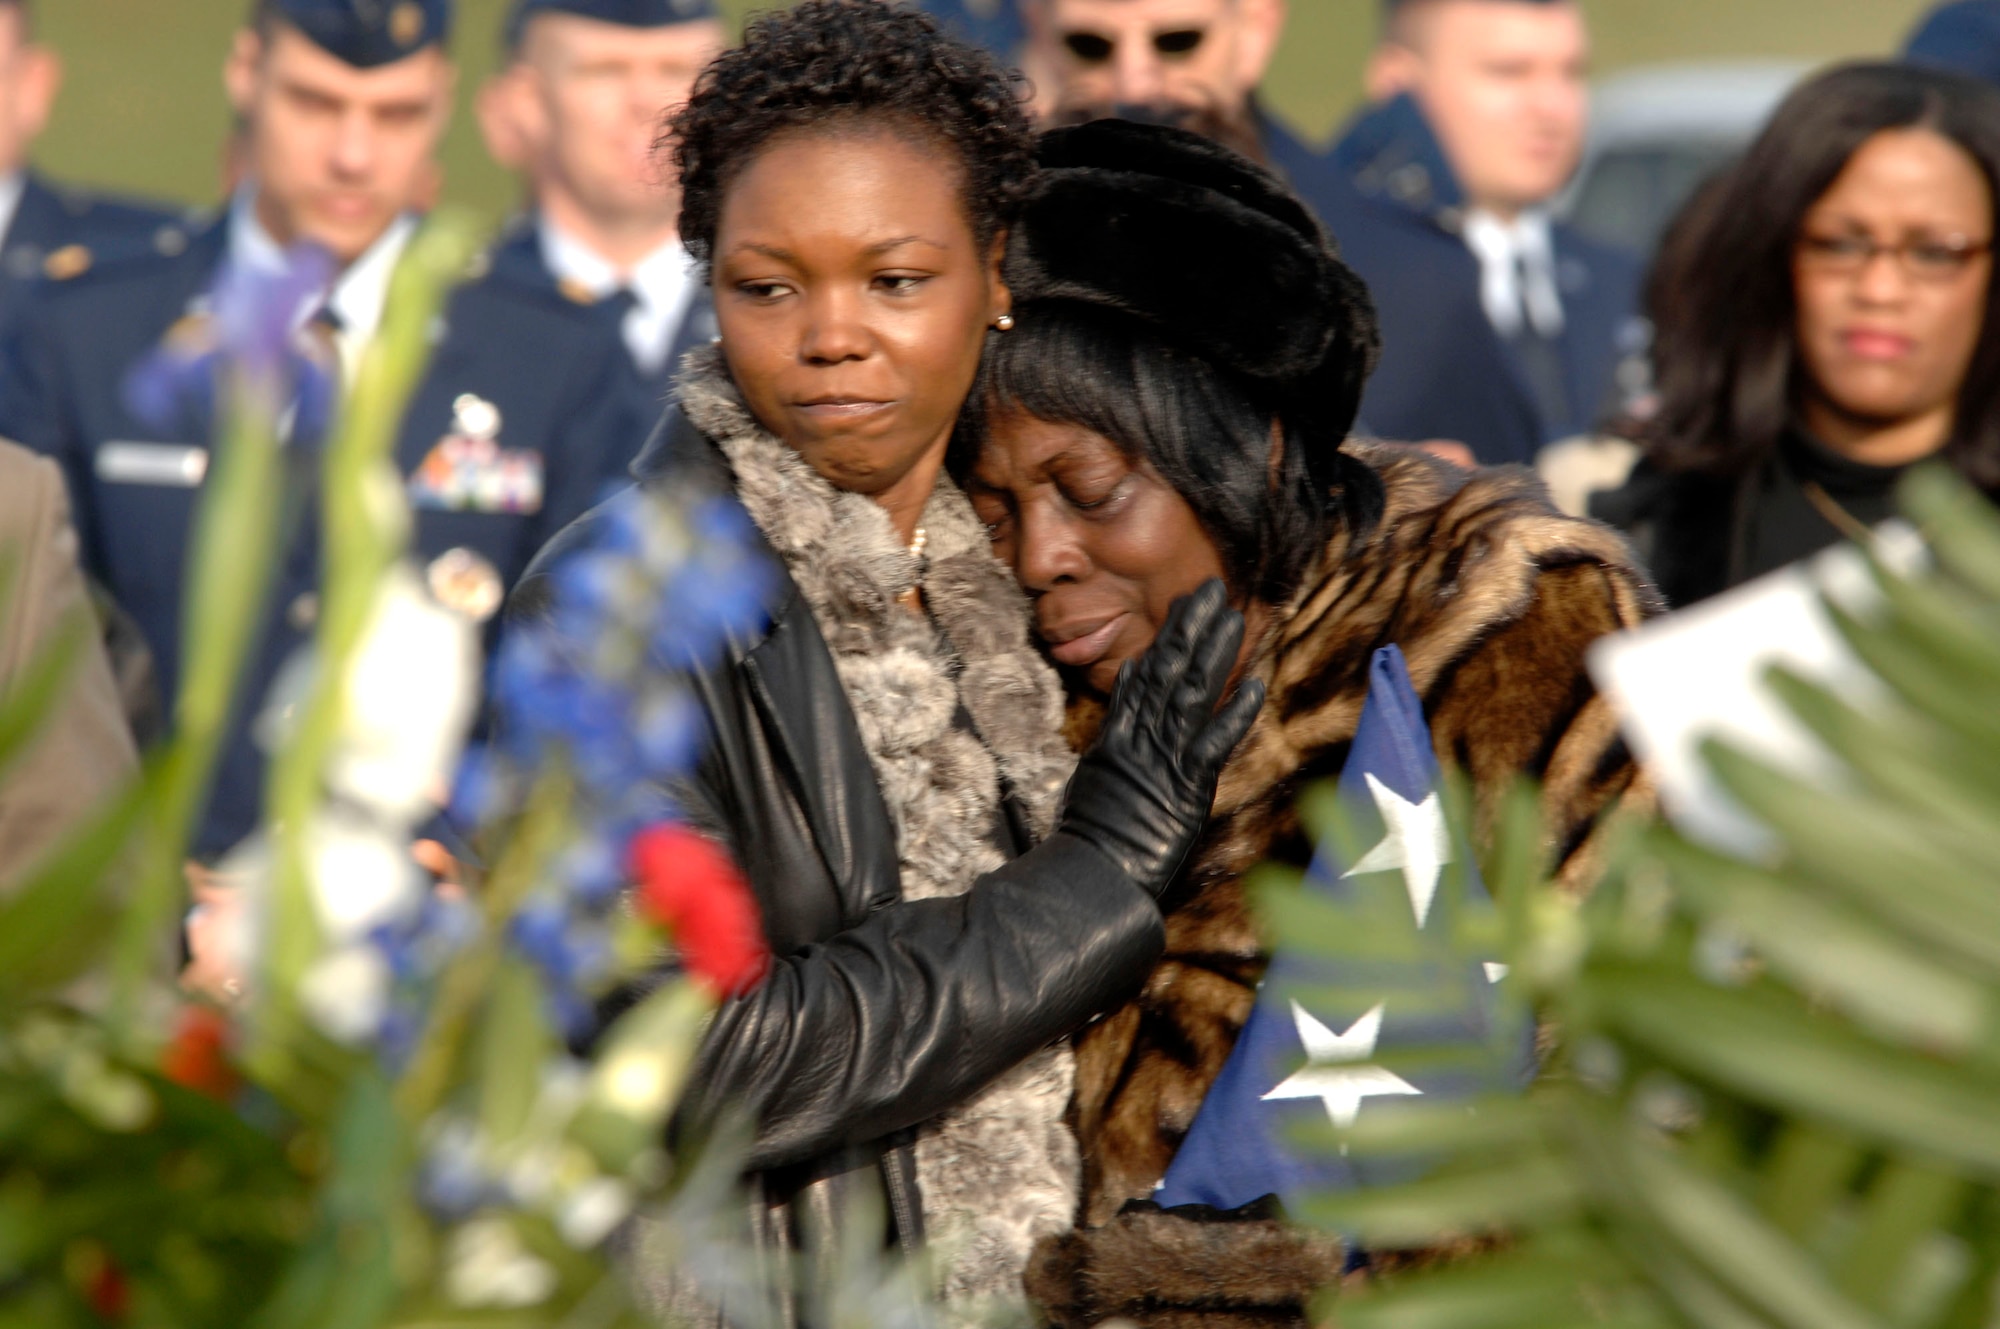 Margaret Evans (right) is comforted by a family member at the conclusion of the funeral for her son, Capt. Kermit Evans, Dec. 12 at Arlington National Cemetery. More than 200 friends and relatives gathered to pay their respects to Captain Evans. Captain Evans was a member of the 27th Civil Engineering Squadron Explosives Ordnance Disposal Flight at Cannon Air Force Base, N.M. He was deployed to Iraq when the helicopter he was a passenger in made an emergency landing and crashed. He was one of the four out of 16 who were killed as a result of the crash. He is srvived by his wife, Perneatha, and Kermit Jr., their 13-month-old son. (U.S. Air Force photo/Tech. Sgt. Cohen Young) 